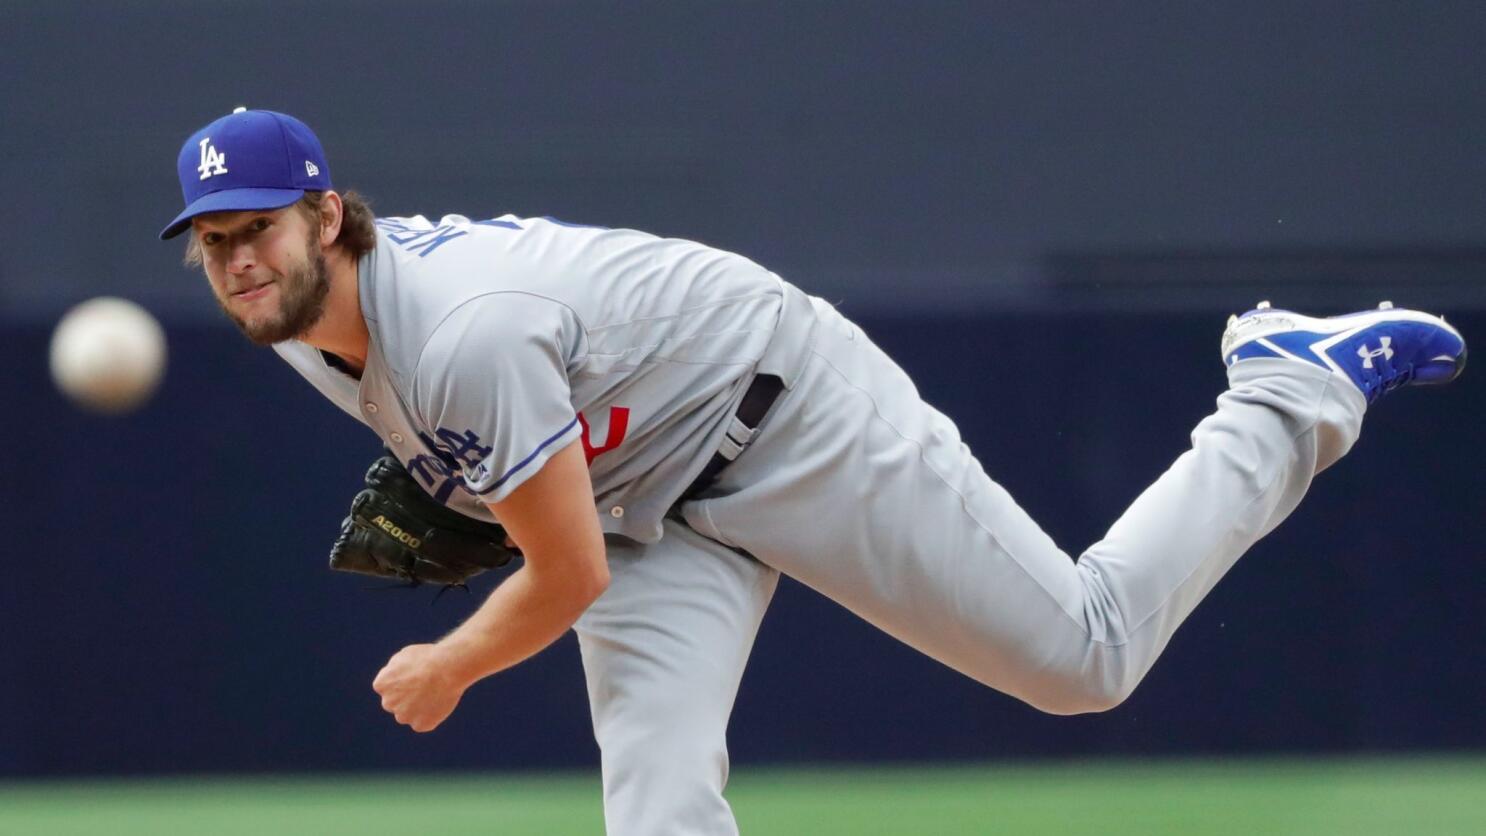 The right time? Clayton Kershaw's walk off the mound may finally